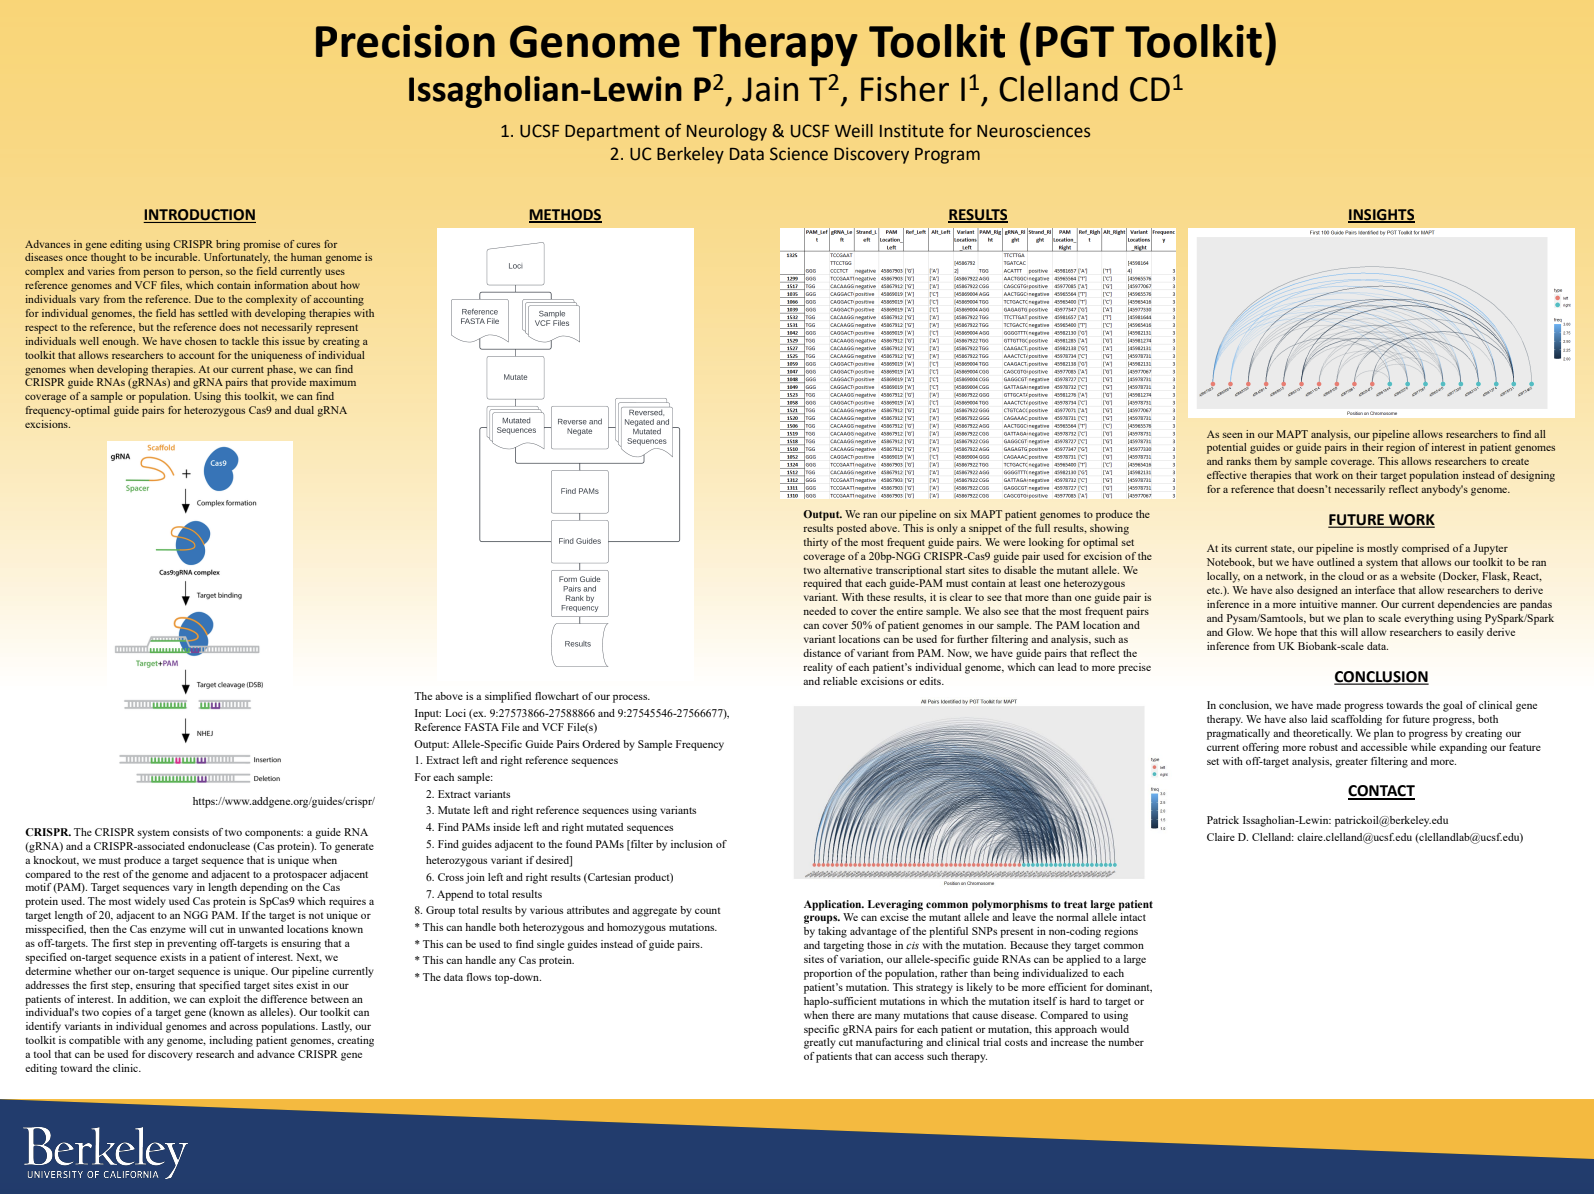 Building allele analyzer from human genomes for CRISPR gene therapy - Spring 2023 Discovery Project